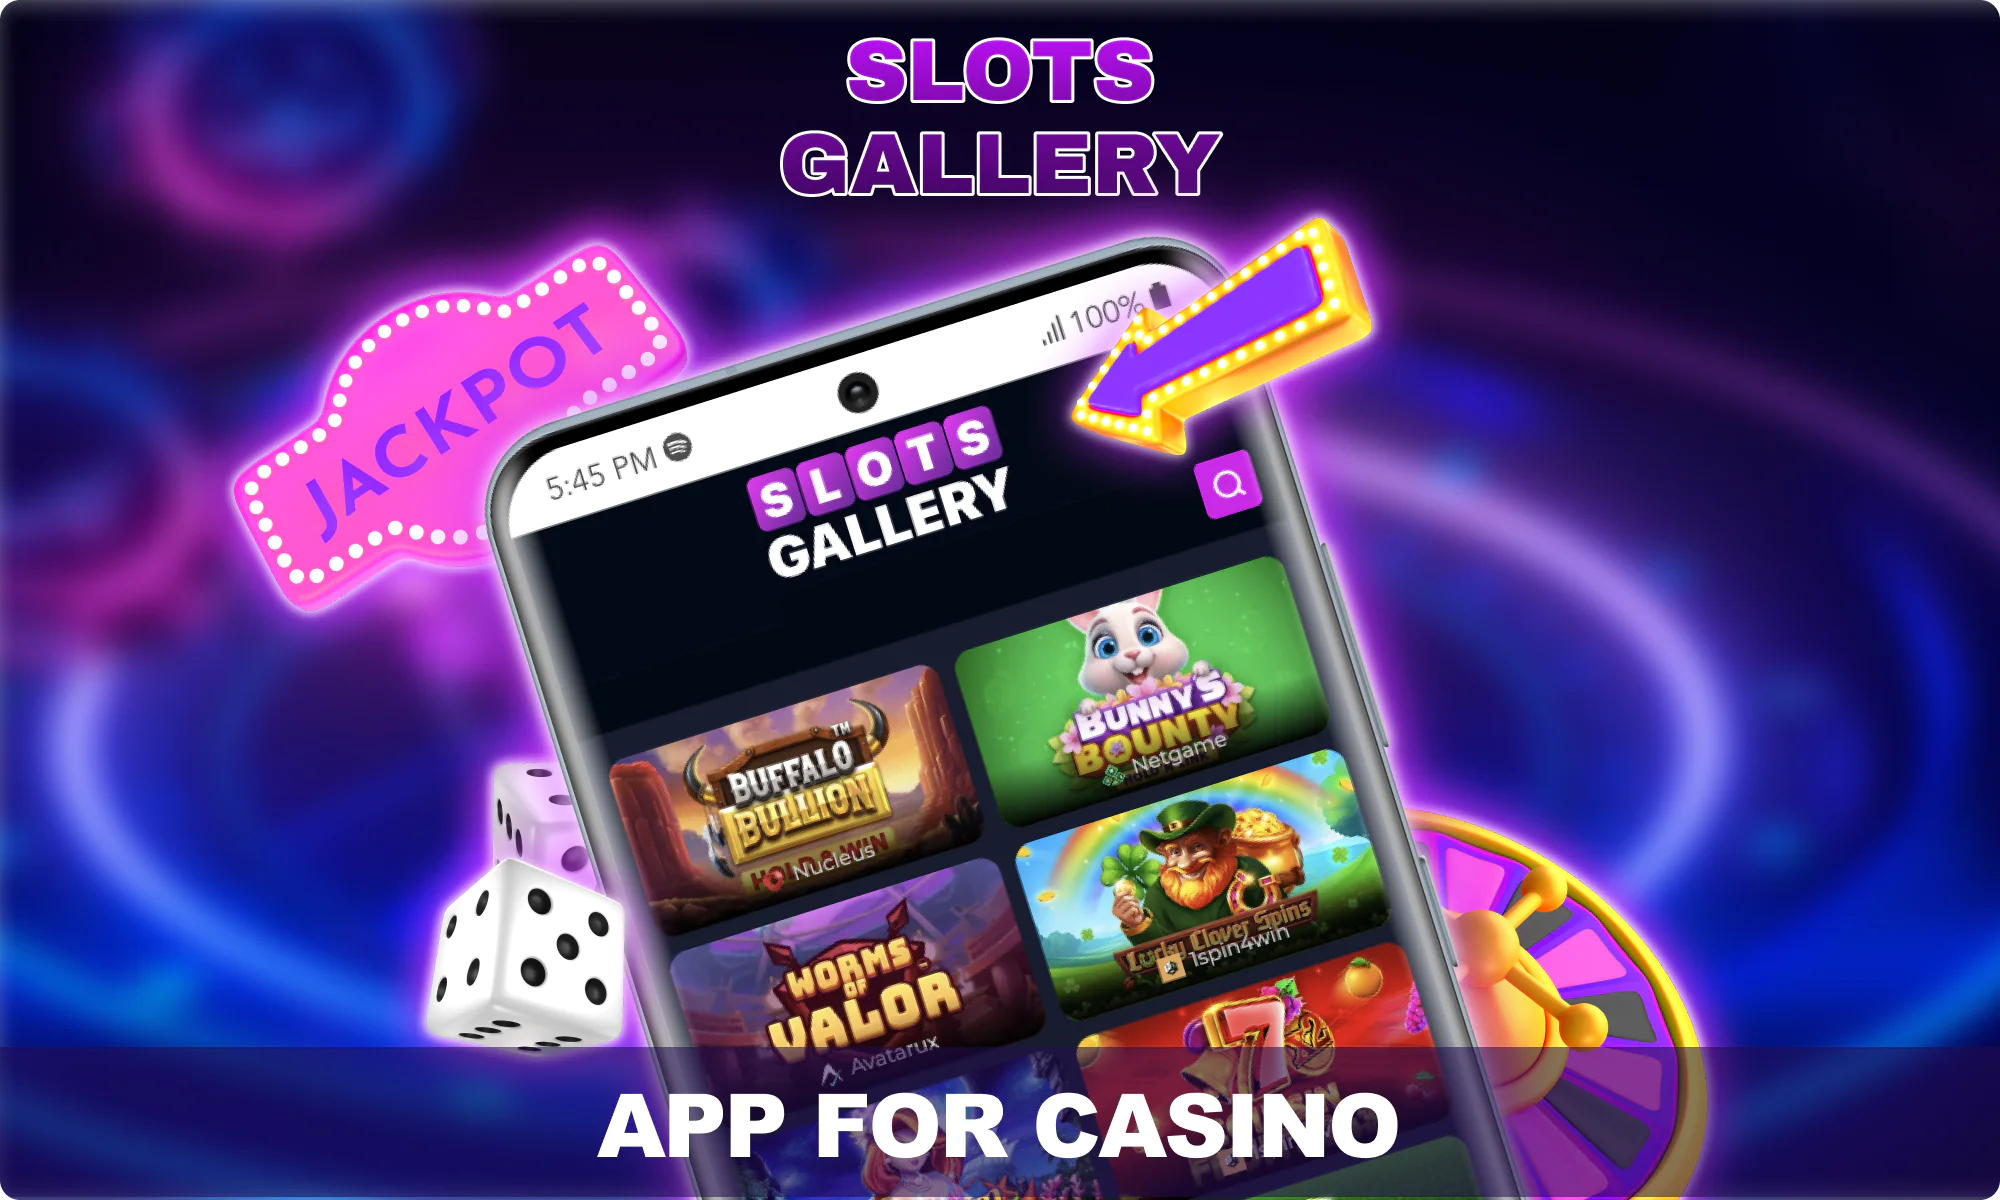 App for Casino - Slots Gallery for Australian players